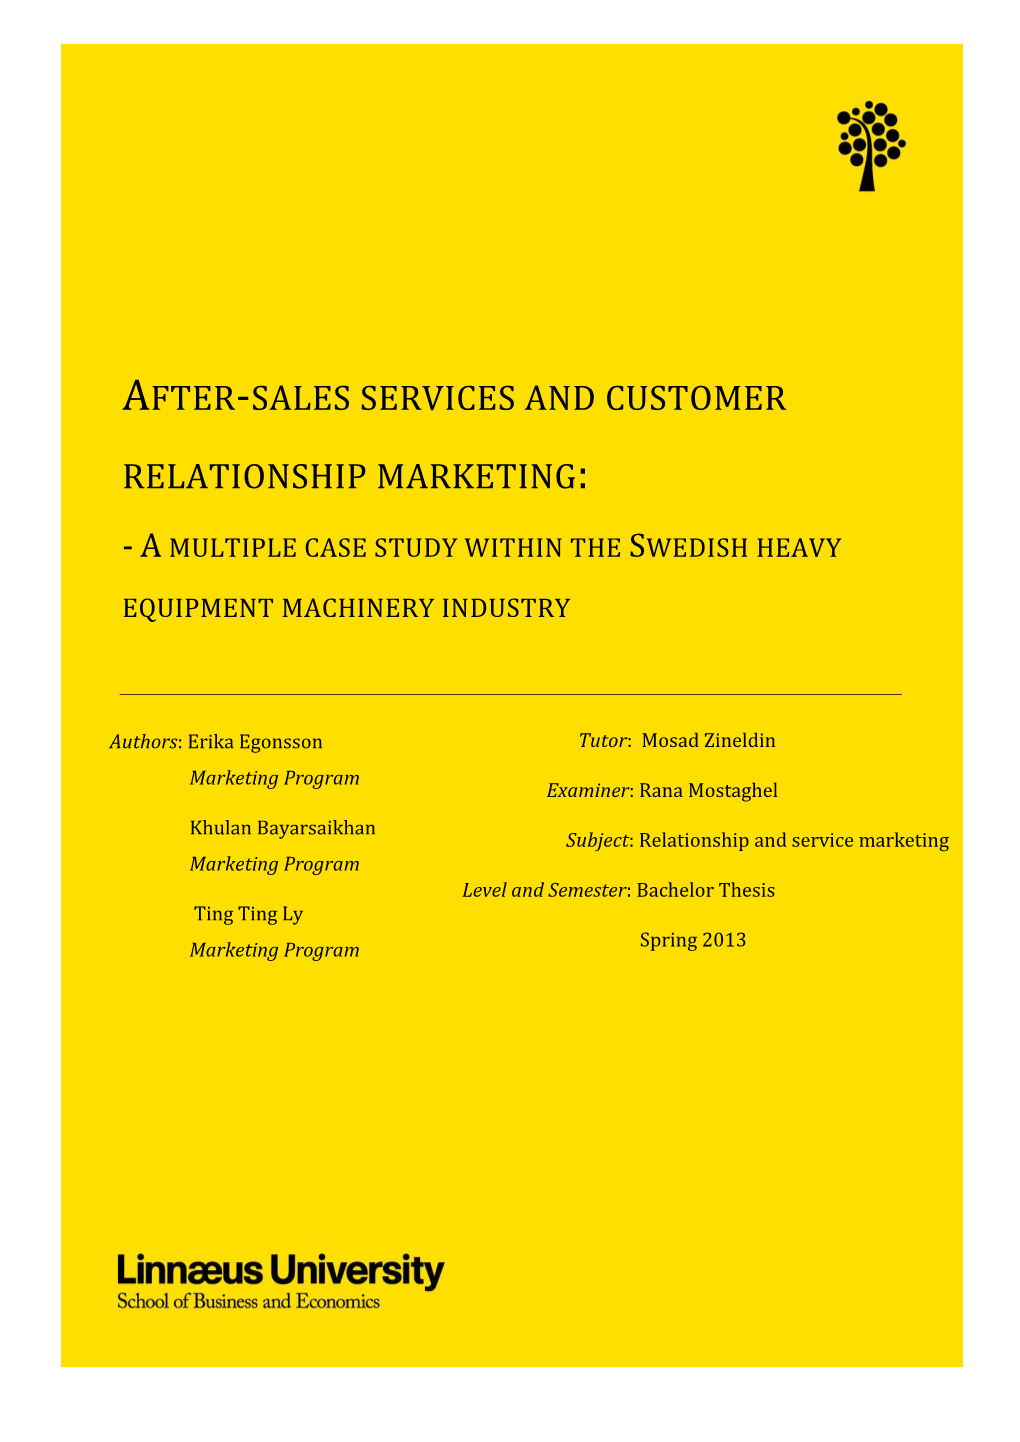 After-Sales Services and Customer Relationship Marketing